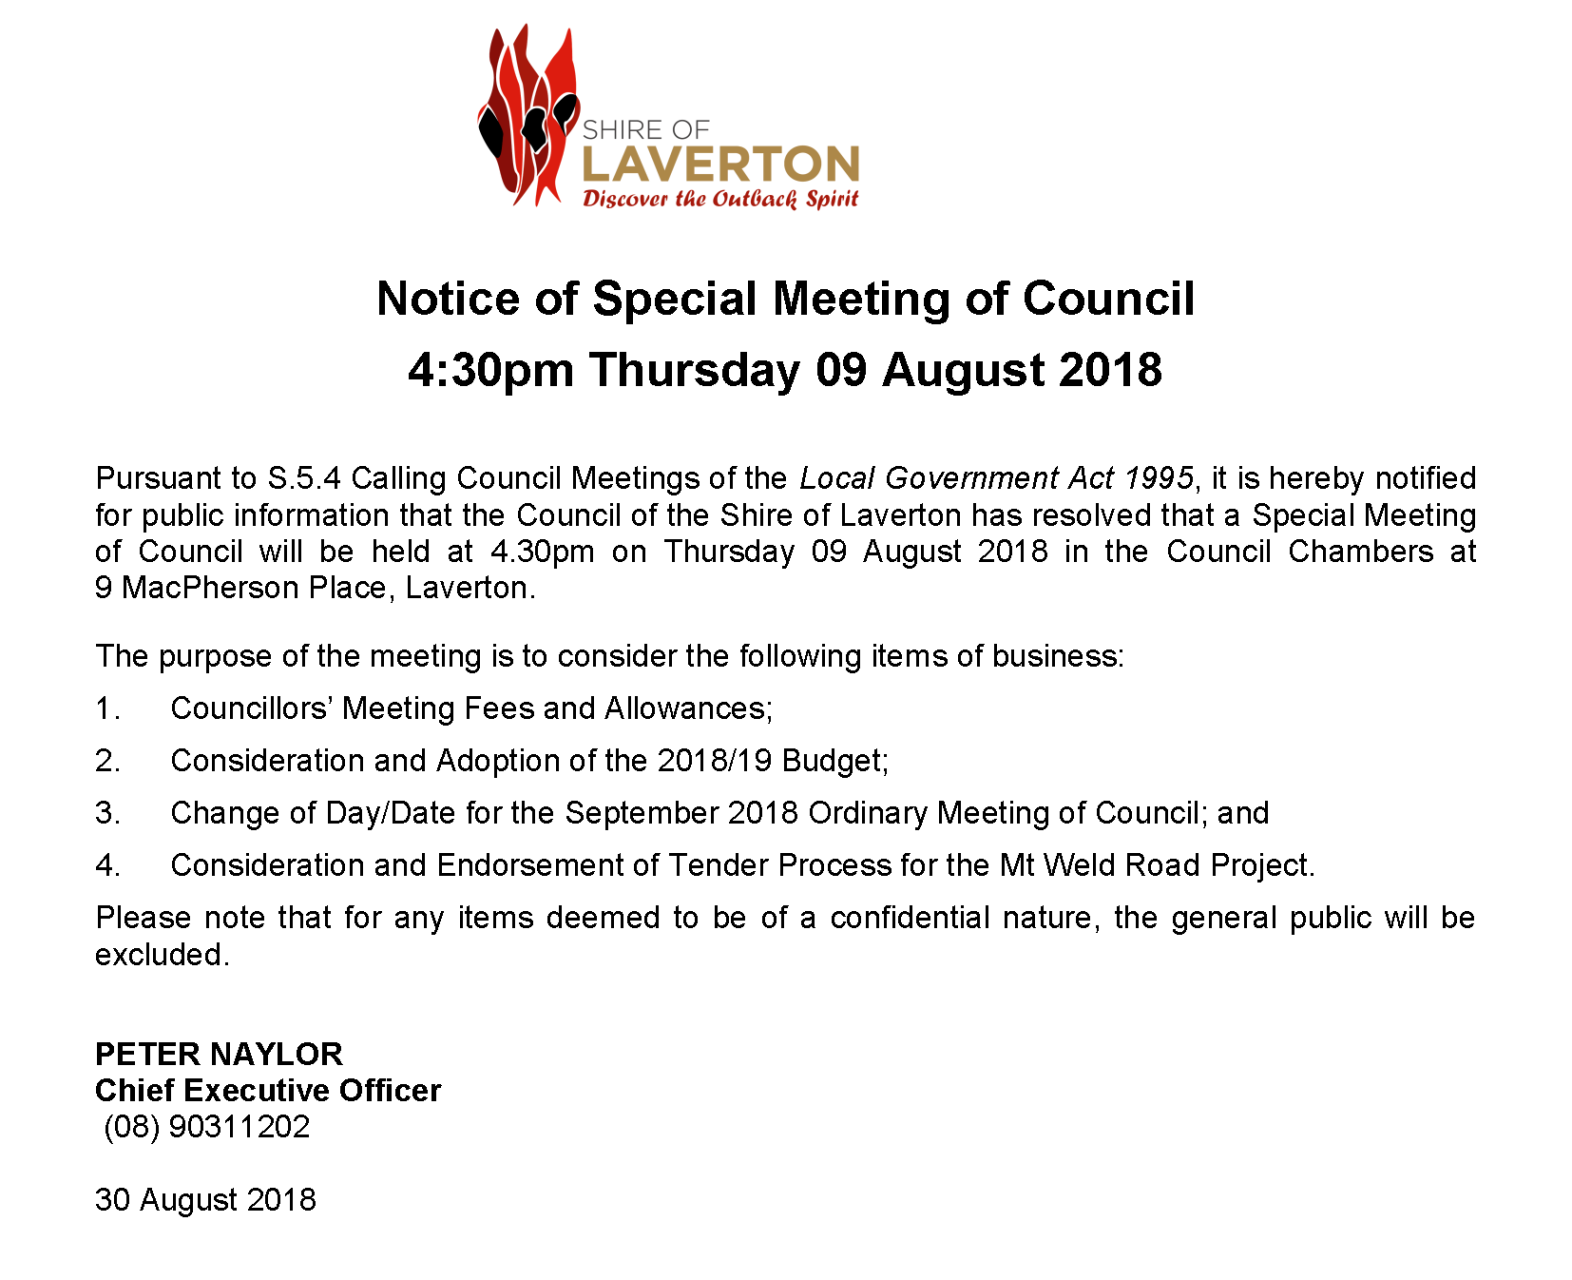 Special Meeting of Council 09 August 2018